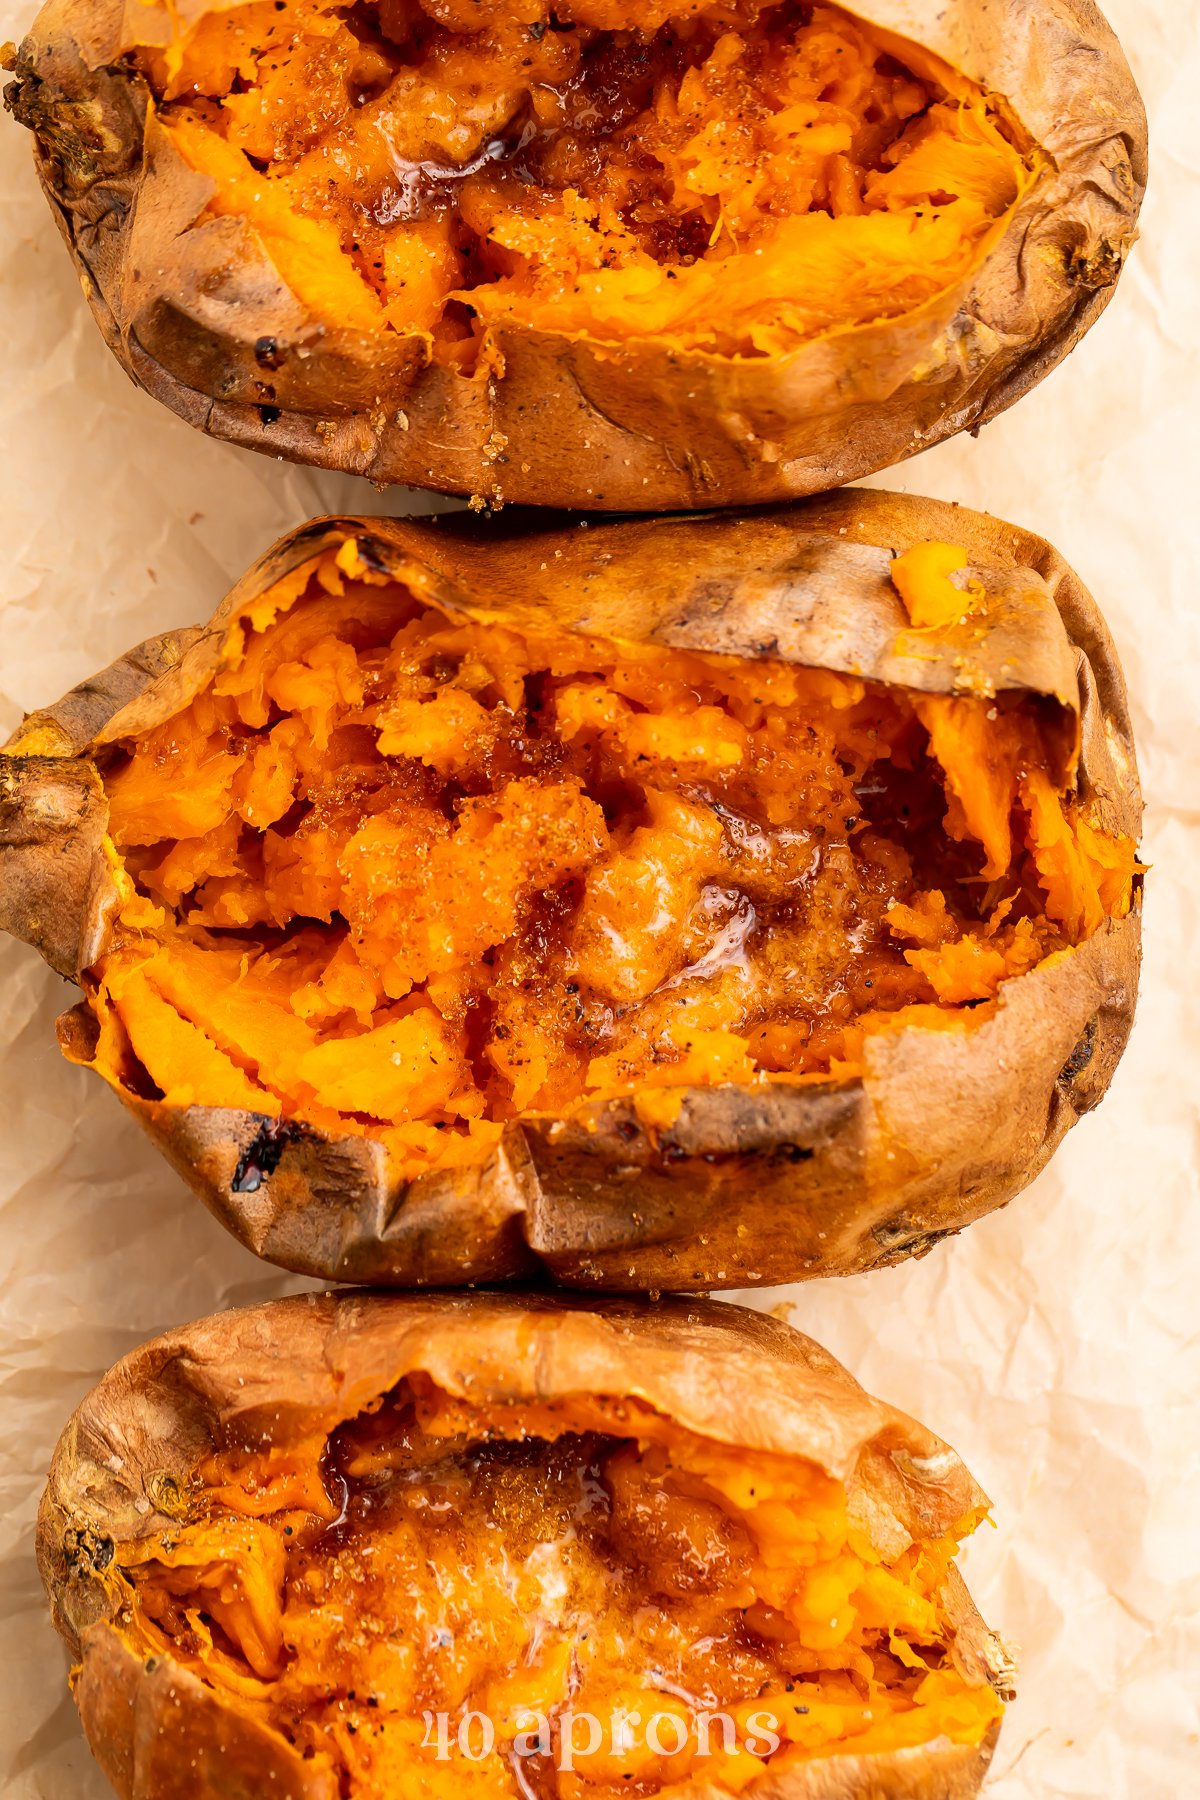 Overhead view of a vertical row of cut-open sweet potatoes on a sheet of parchment paper.